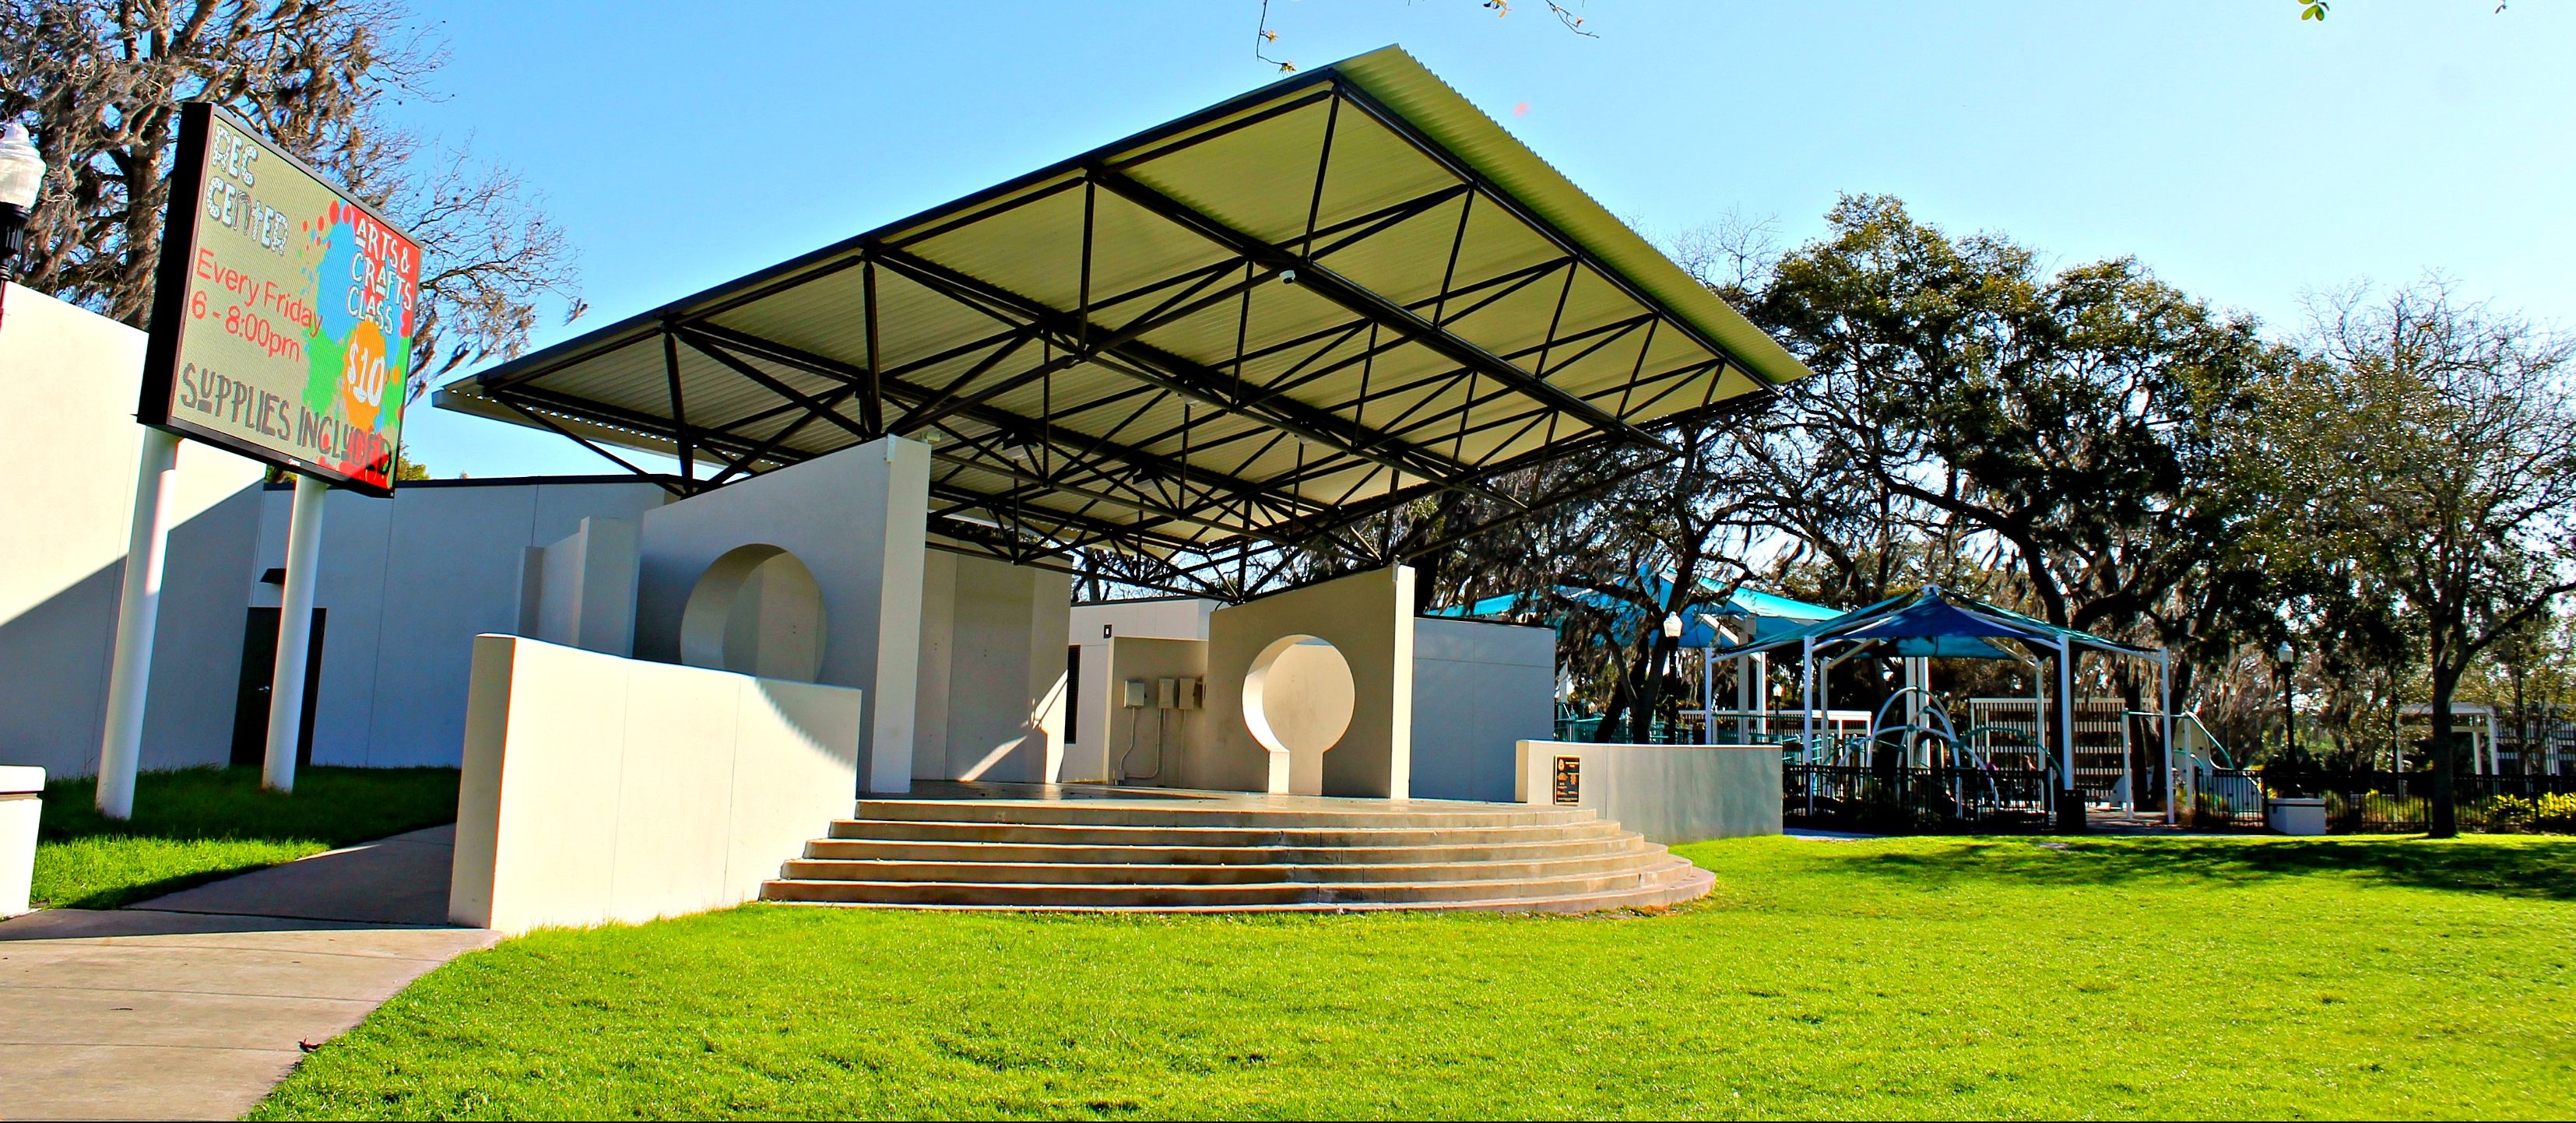 An outdoor curved concrete thrust stage with an awning and wraparound stairs in a sunny field. A playground is visible in the background.